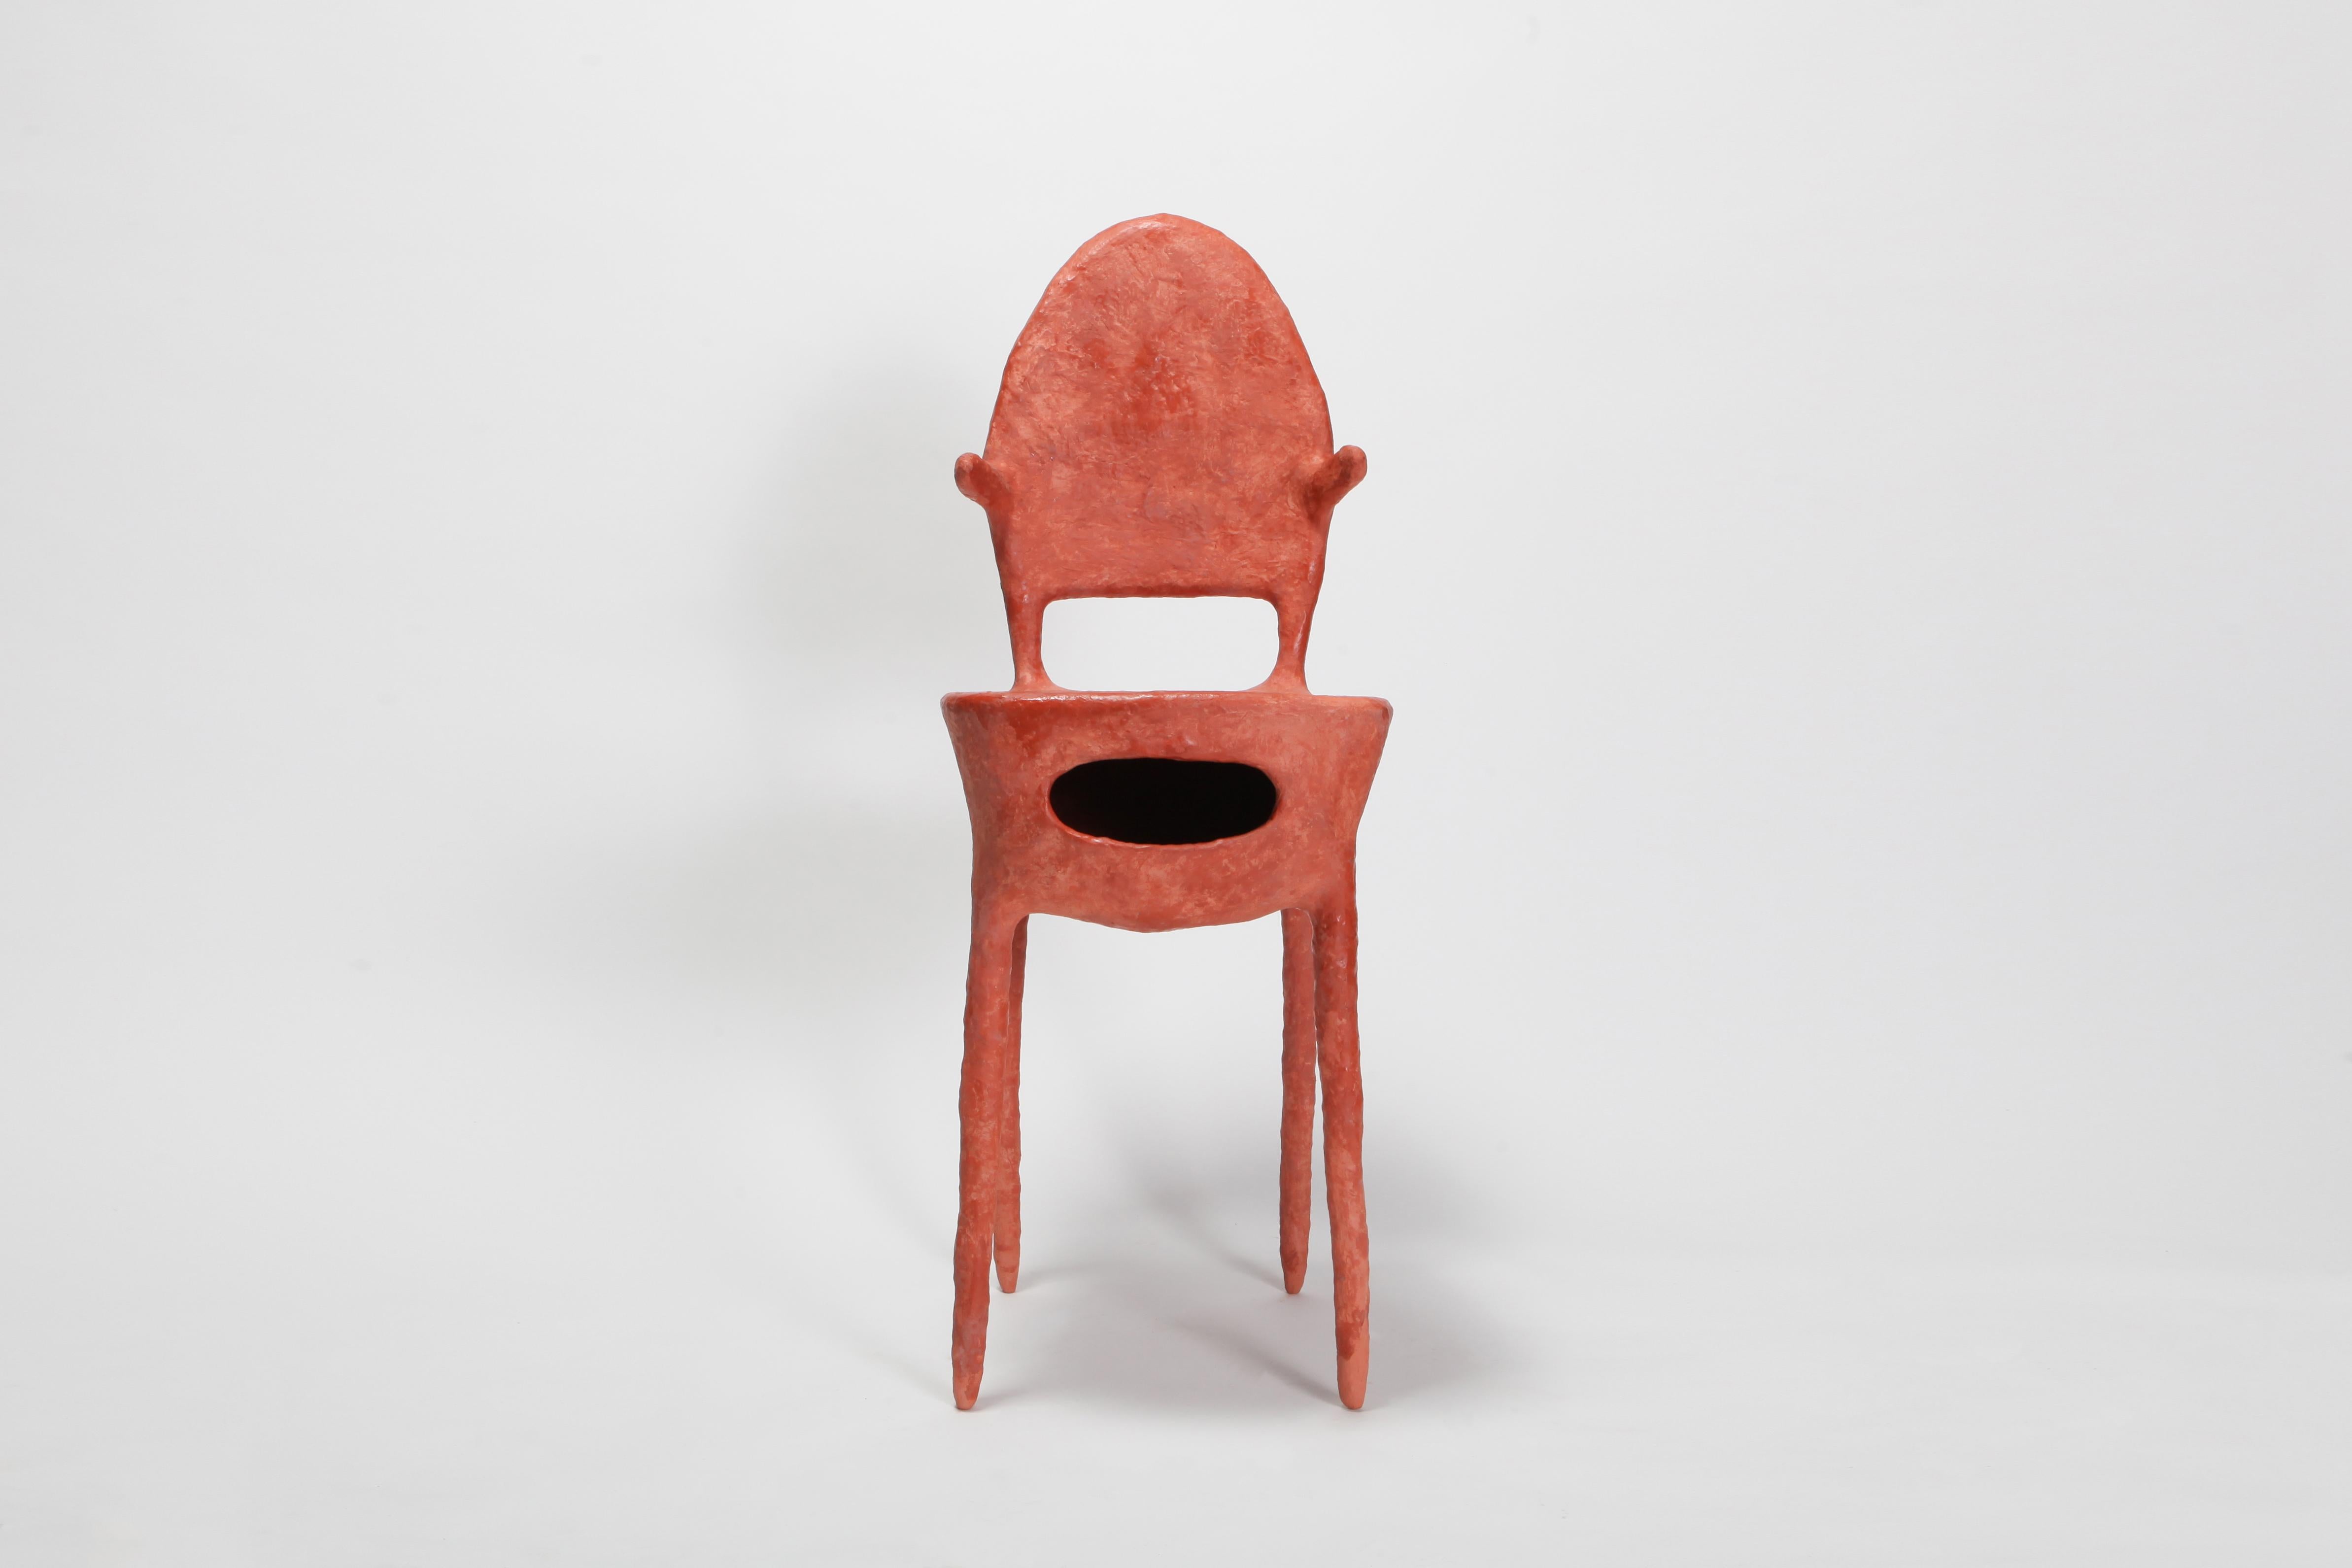 Cotta chair by Decio Studio made at alfa.brussels for Everyday Gallery, unique piece, 2019??

The piece belongs to categories: collectible design, functional art & art furniture.

Decio (IT) shows ‘Cotta’, his unseen and undiscovered body of